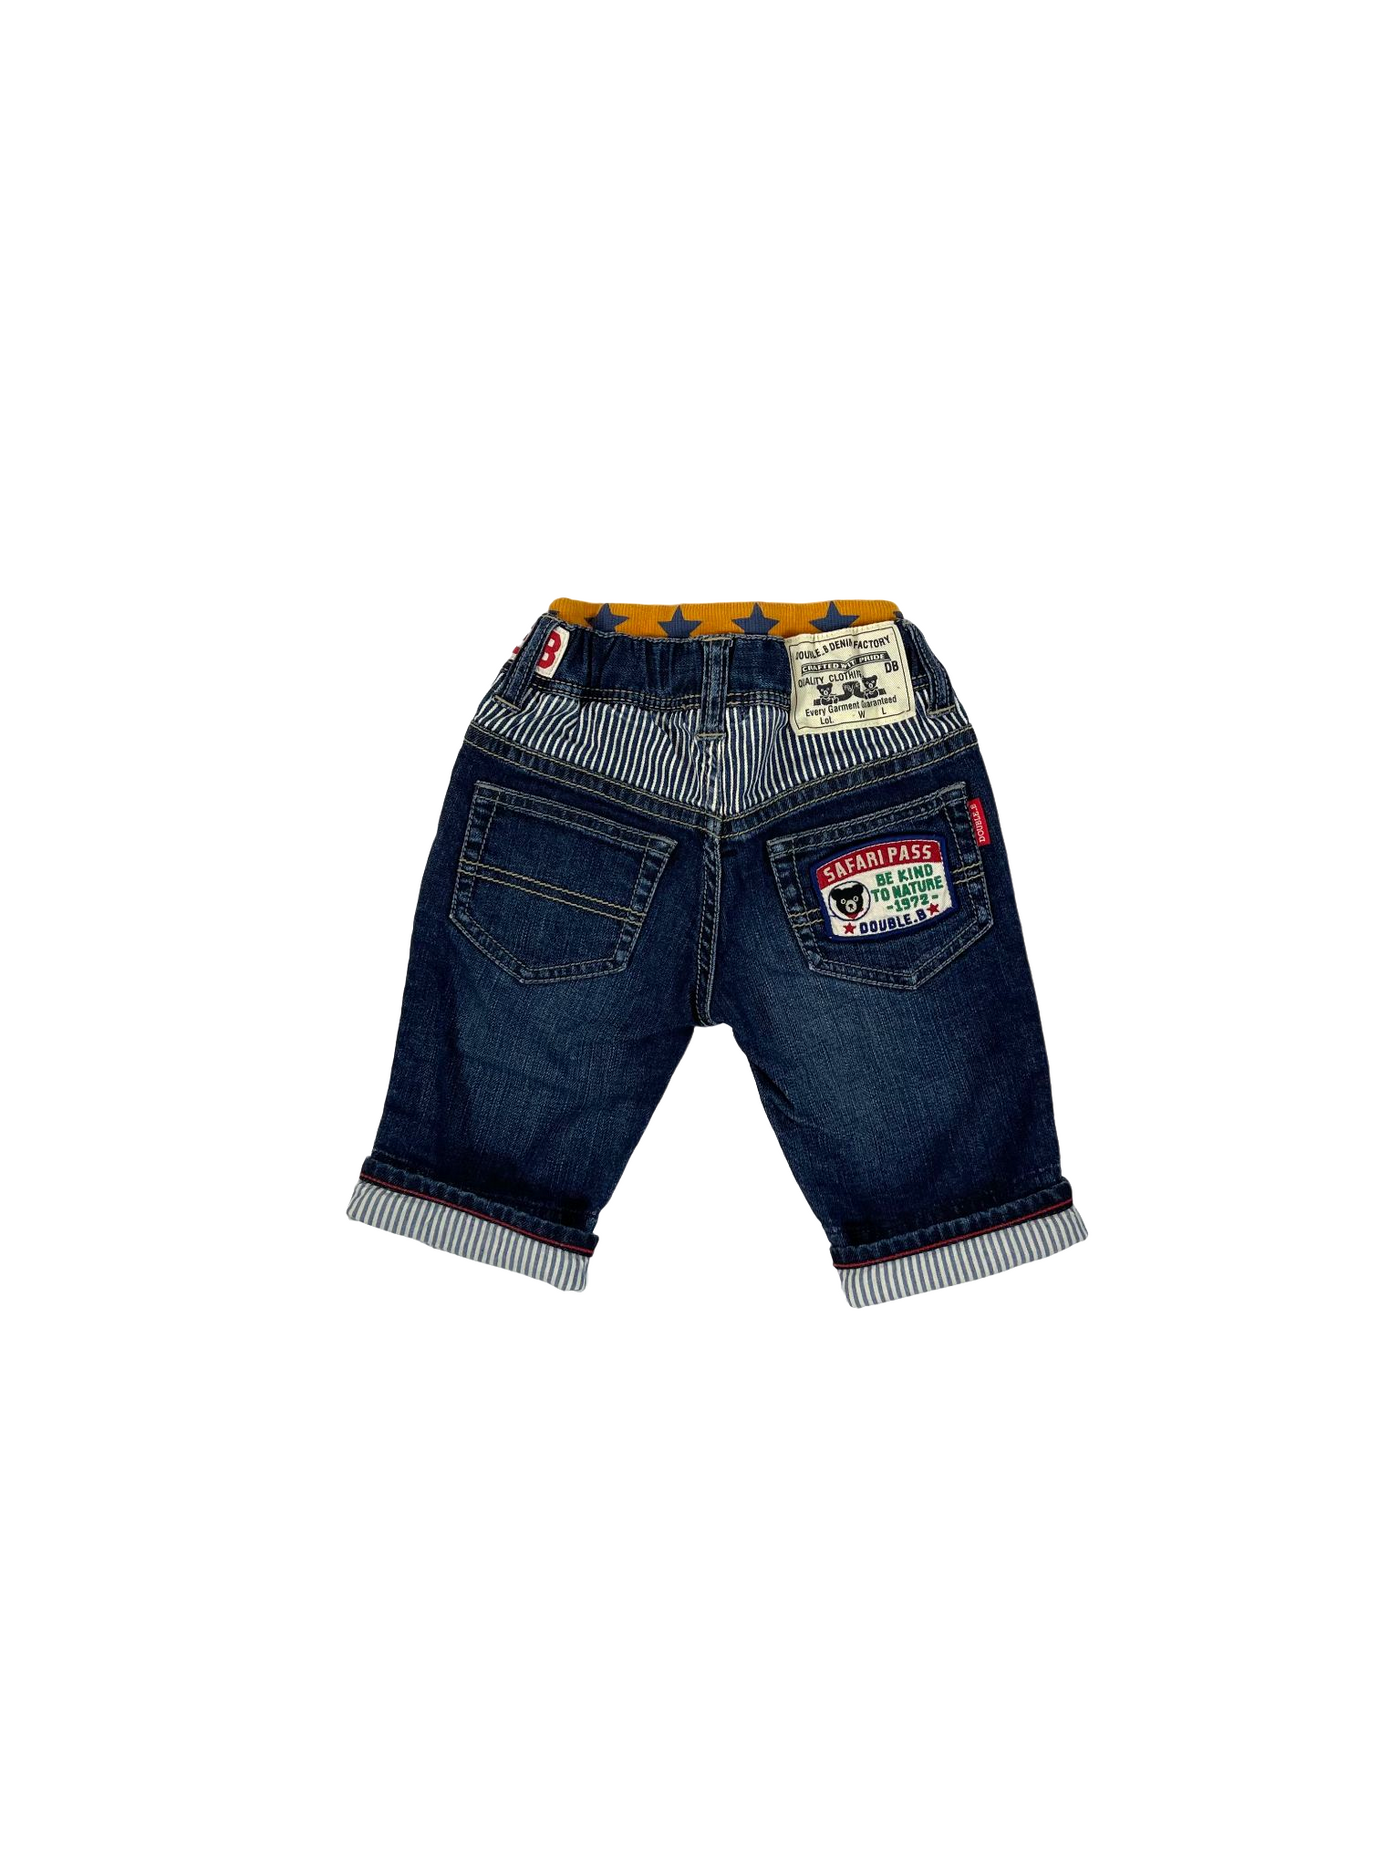 MIkihouse Boy Shorts(4Y)